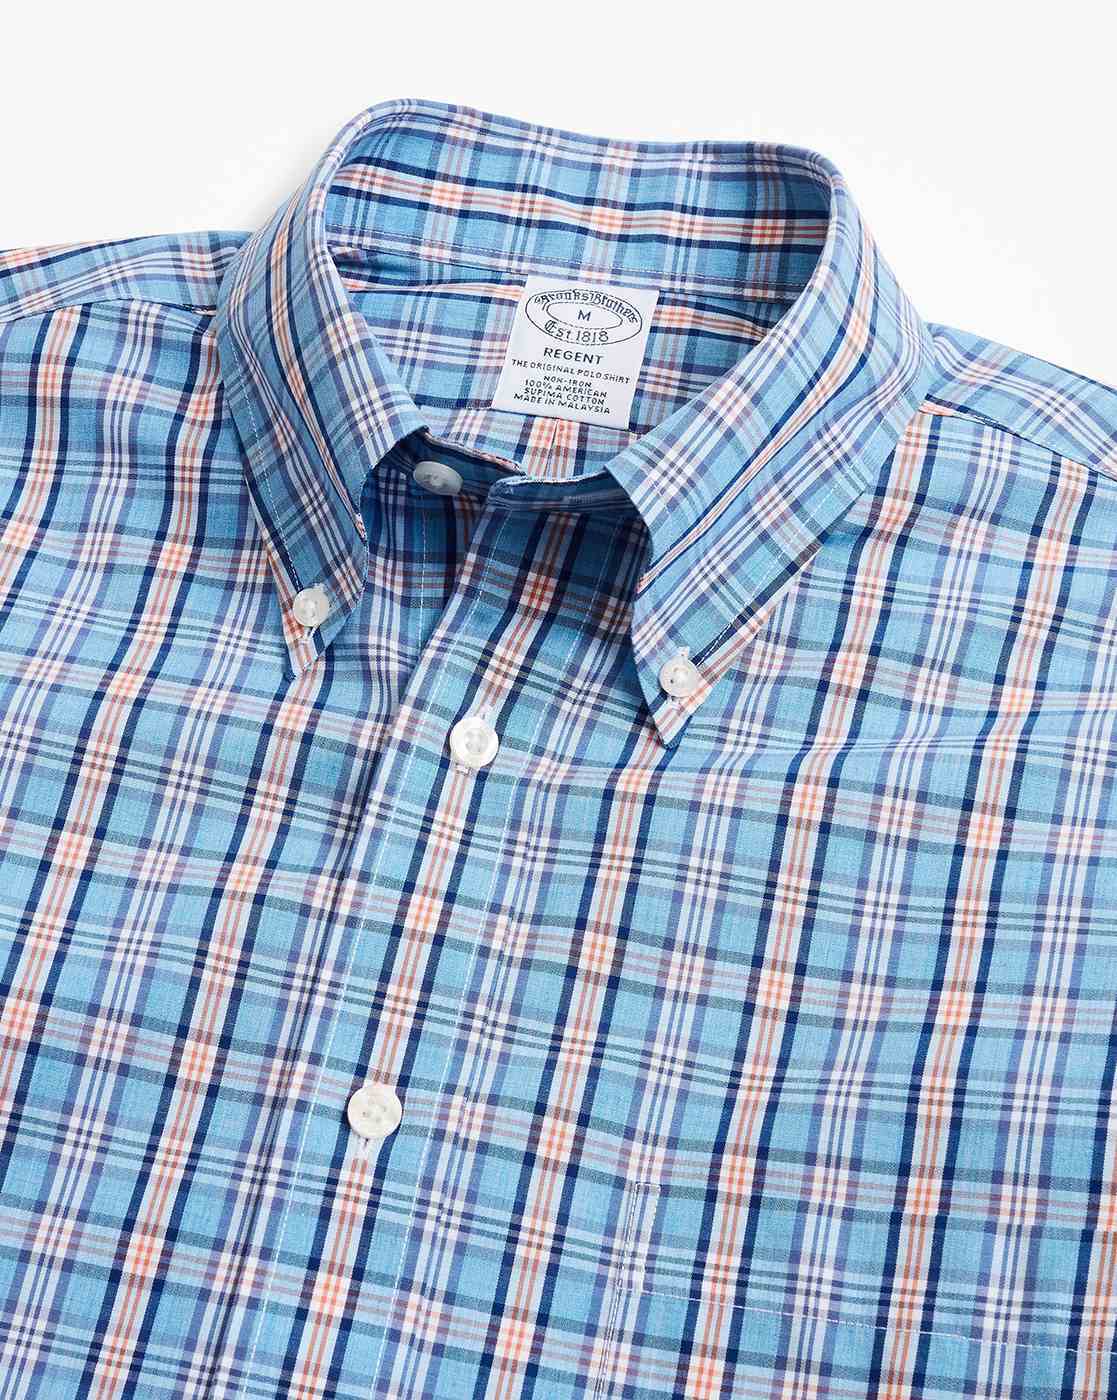 Brooks Brothers Regent Blue Red & White Check Shirt Size M No 450 